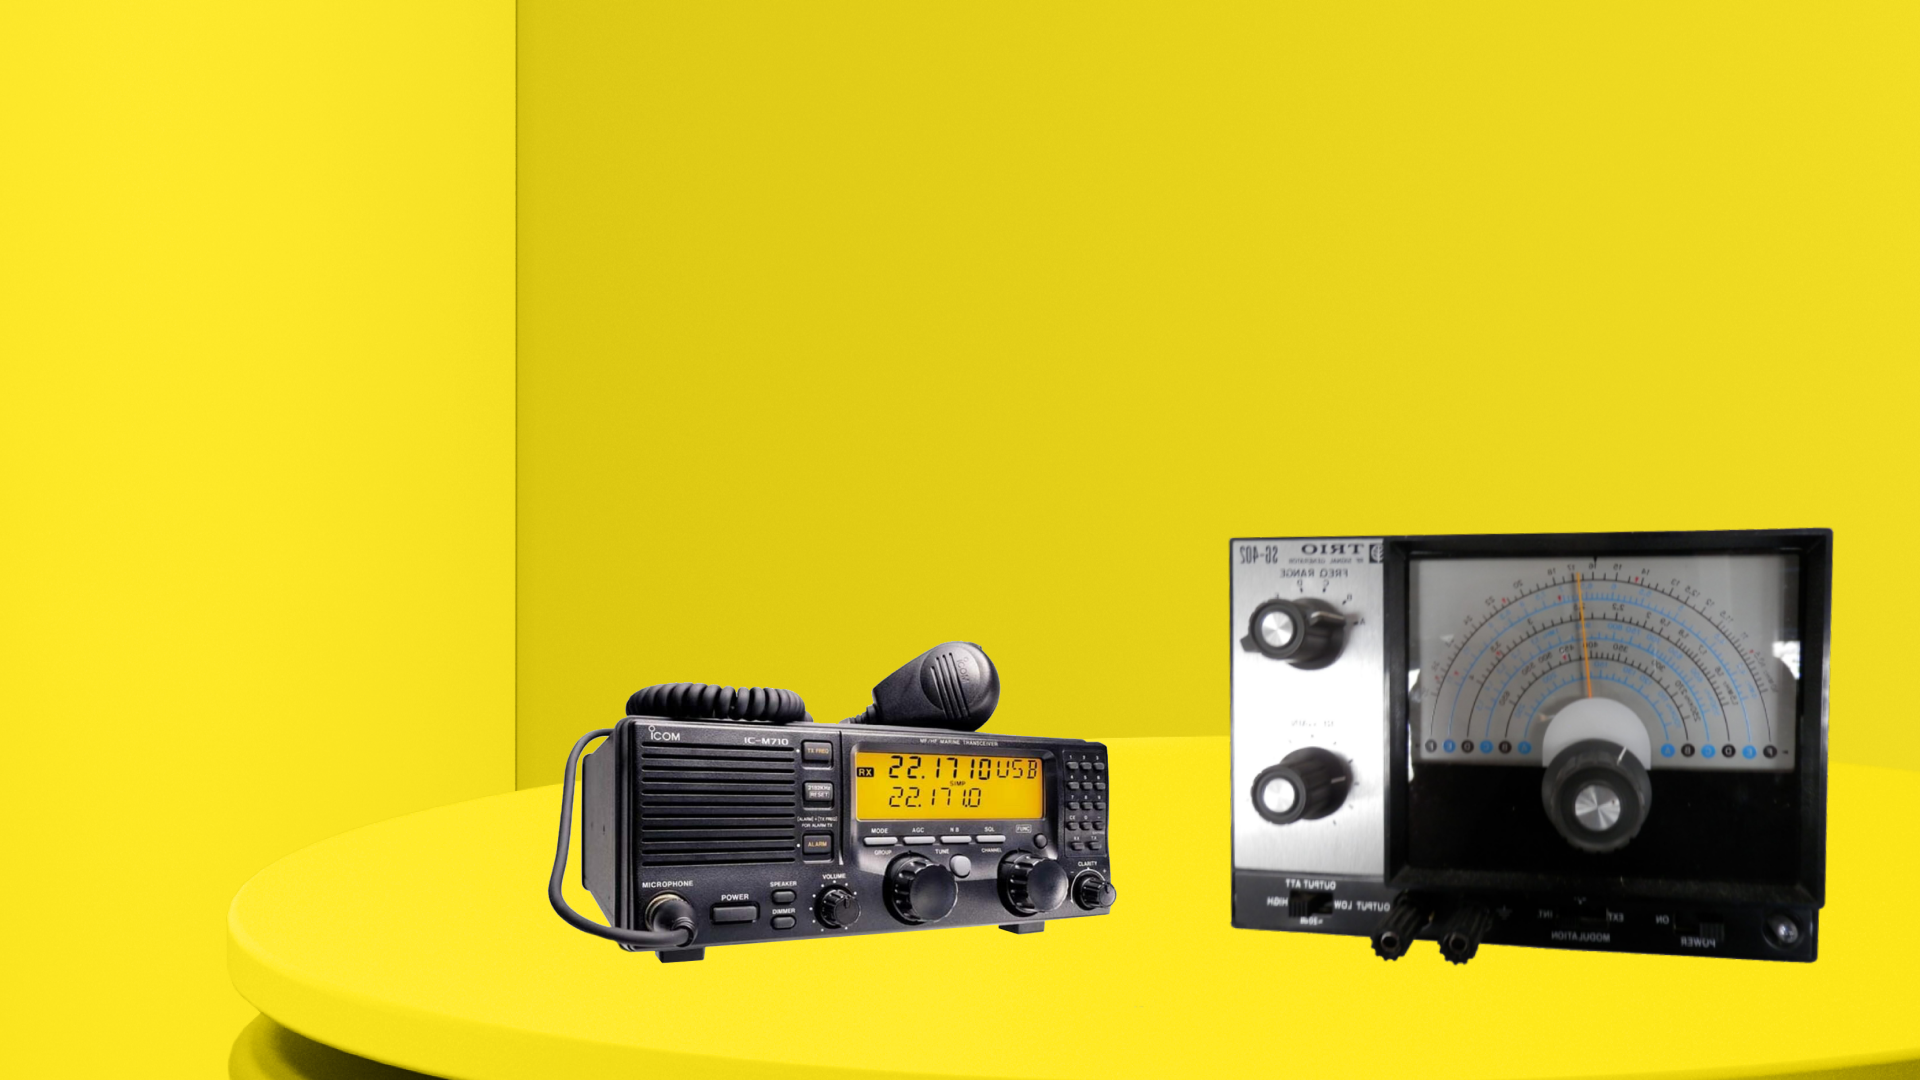 Two radio devices on a yellow plinth in a yellow room. 